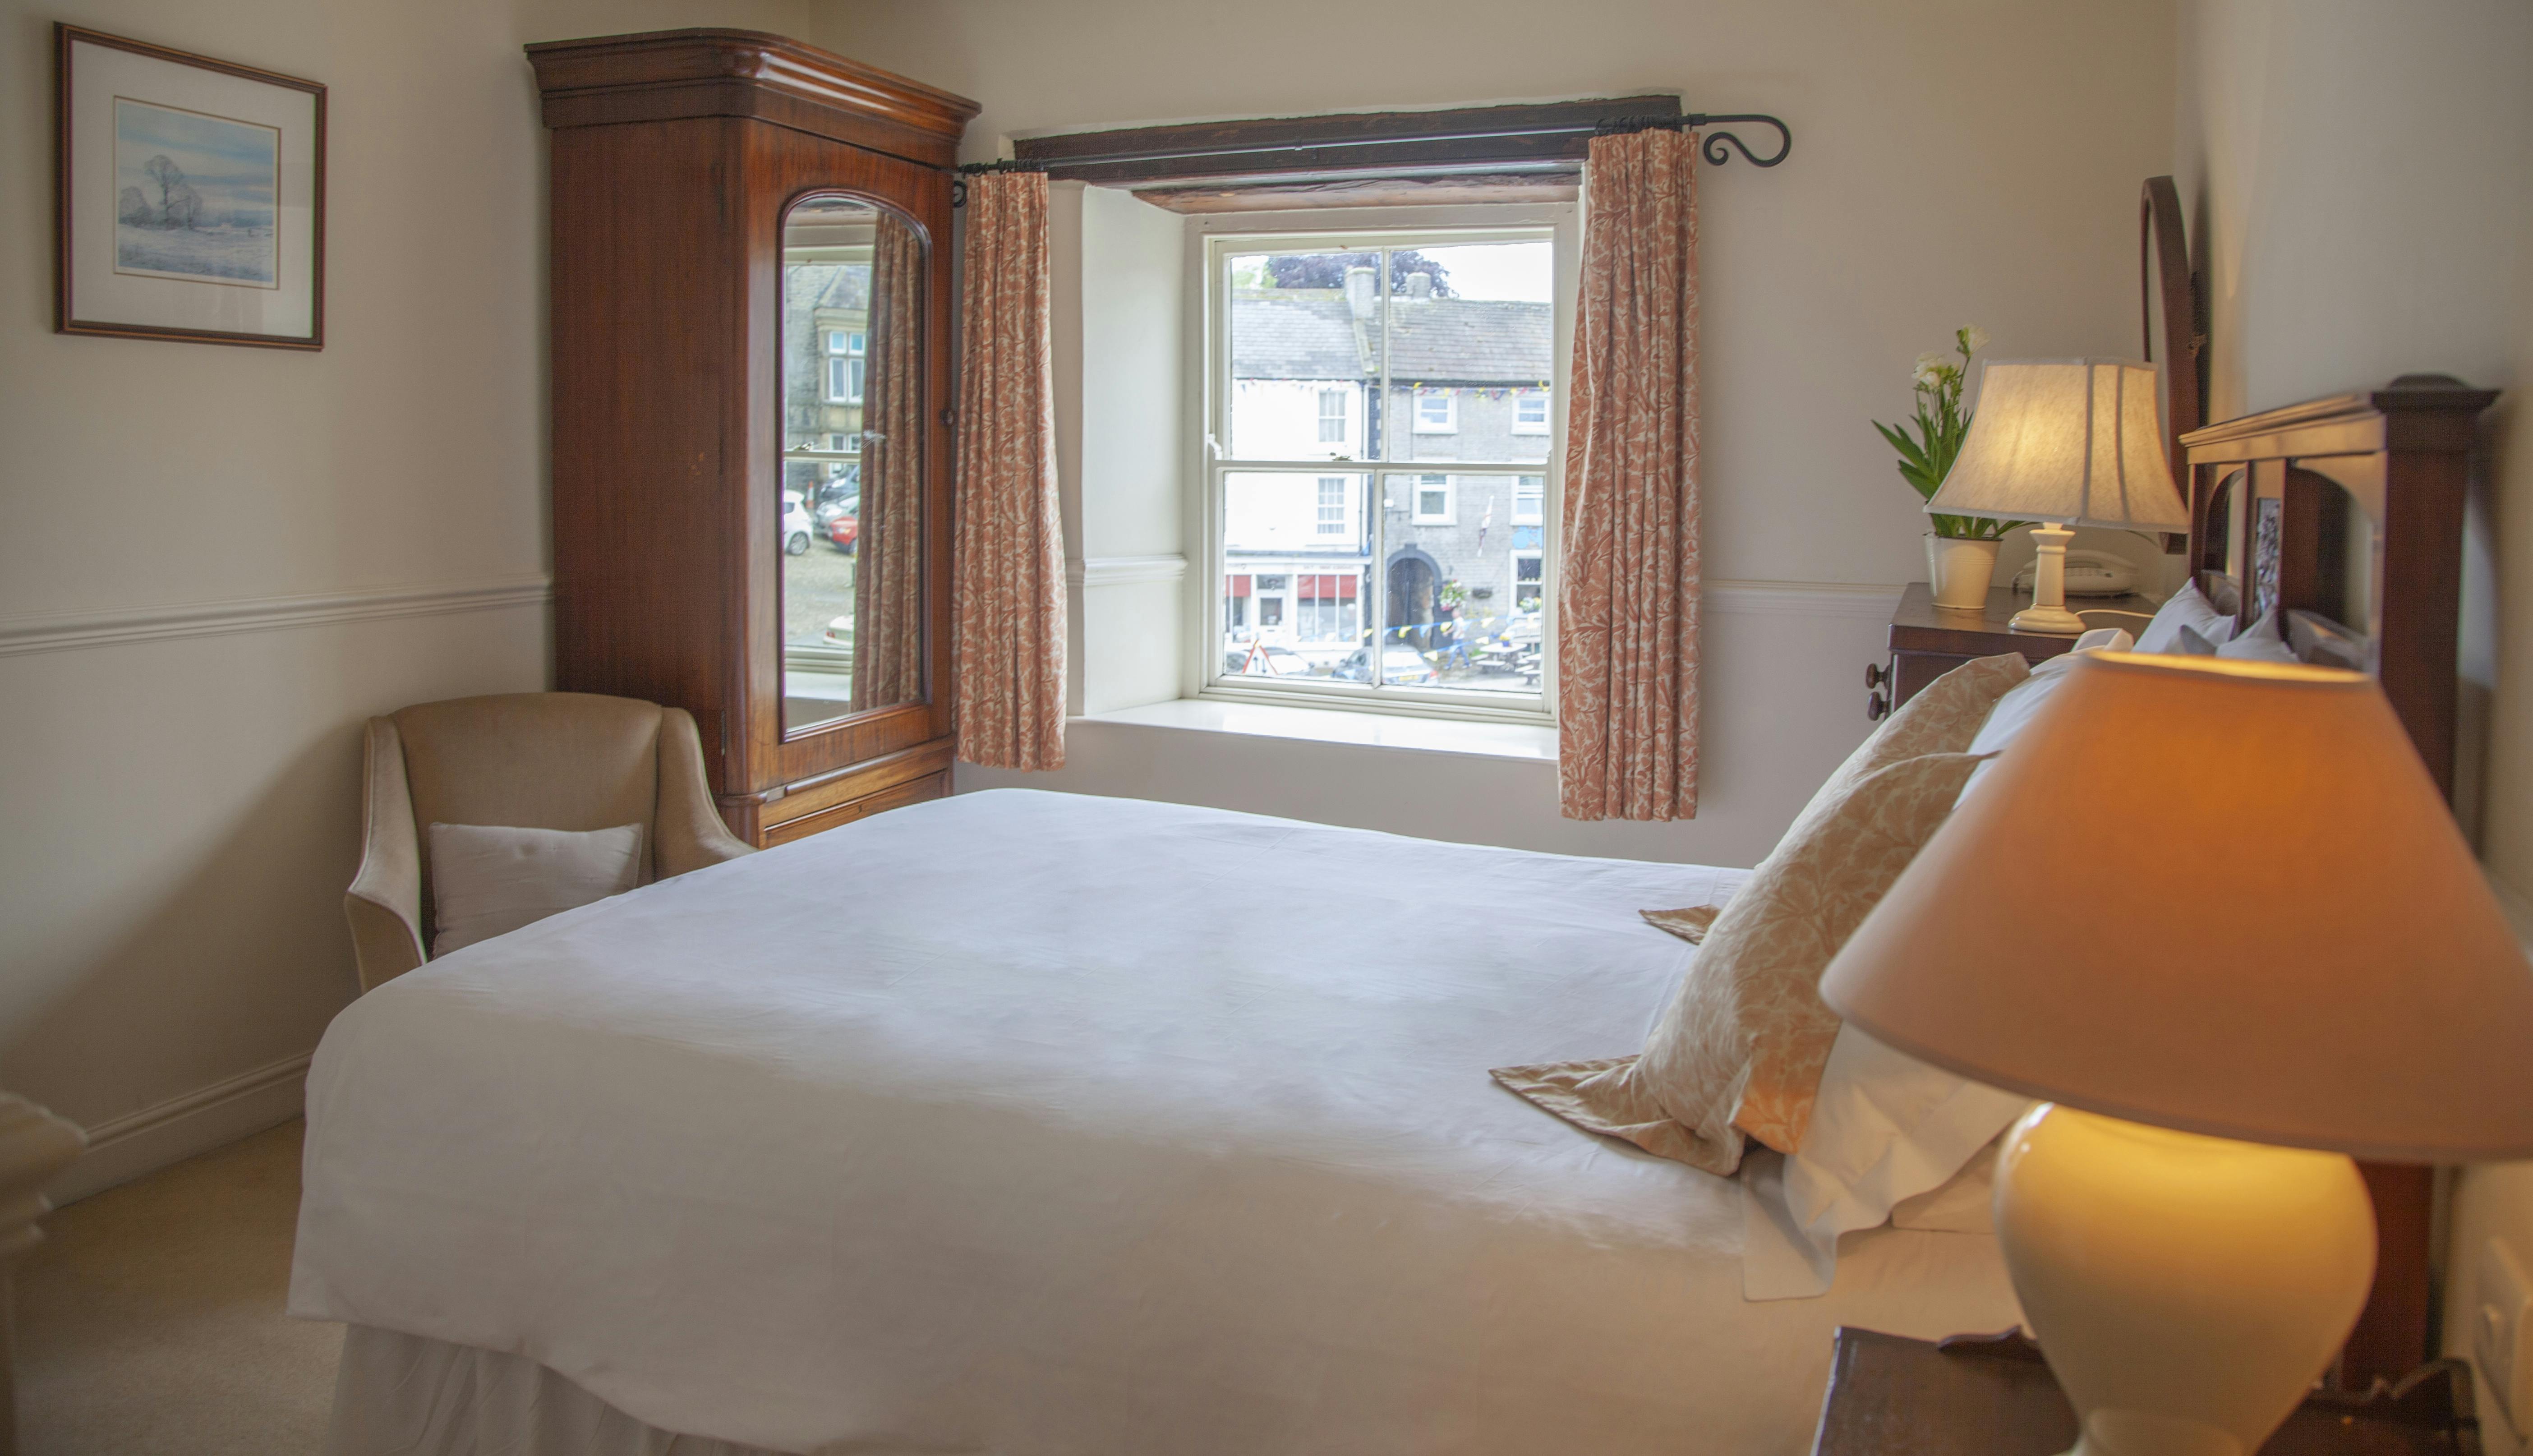 The Wensleydale Hotel, Middleham, offers boutique accommodation in the heart of the Yorkshire Dales